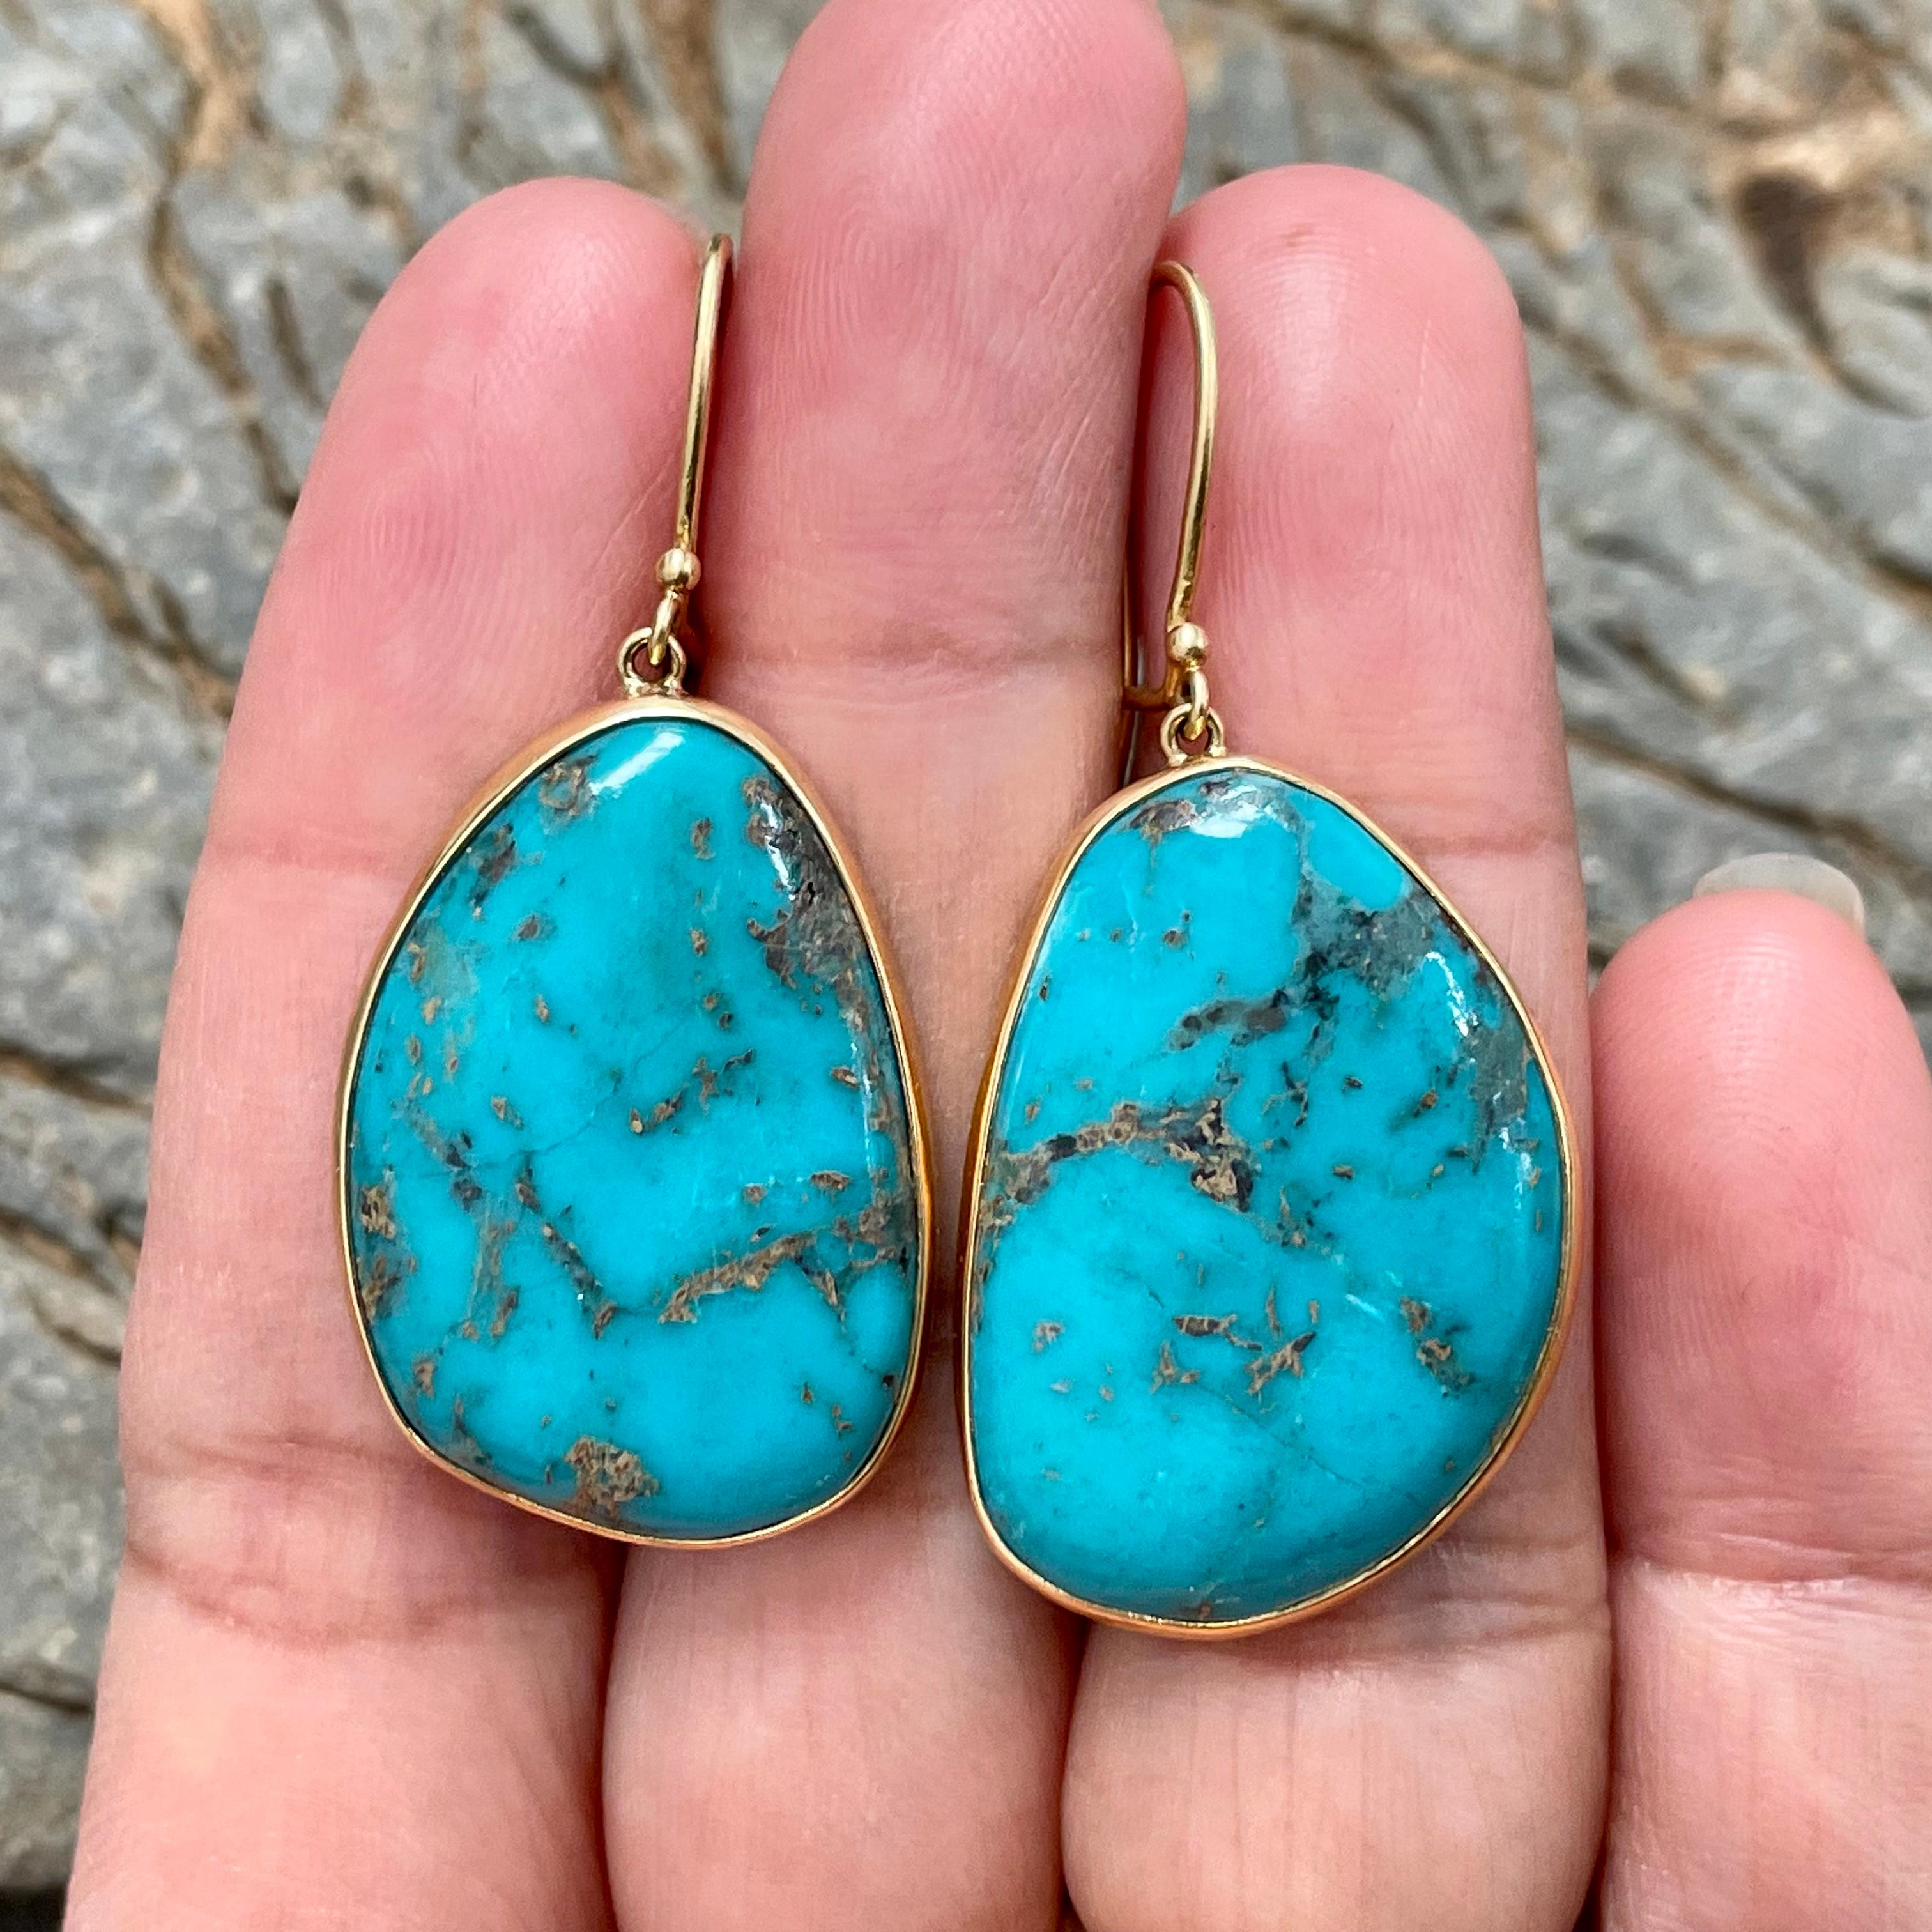 Contemporary Steven Battelle 36.8 Carats Turquoise 18K Gold Wire Earrings